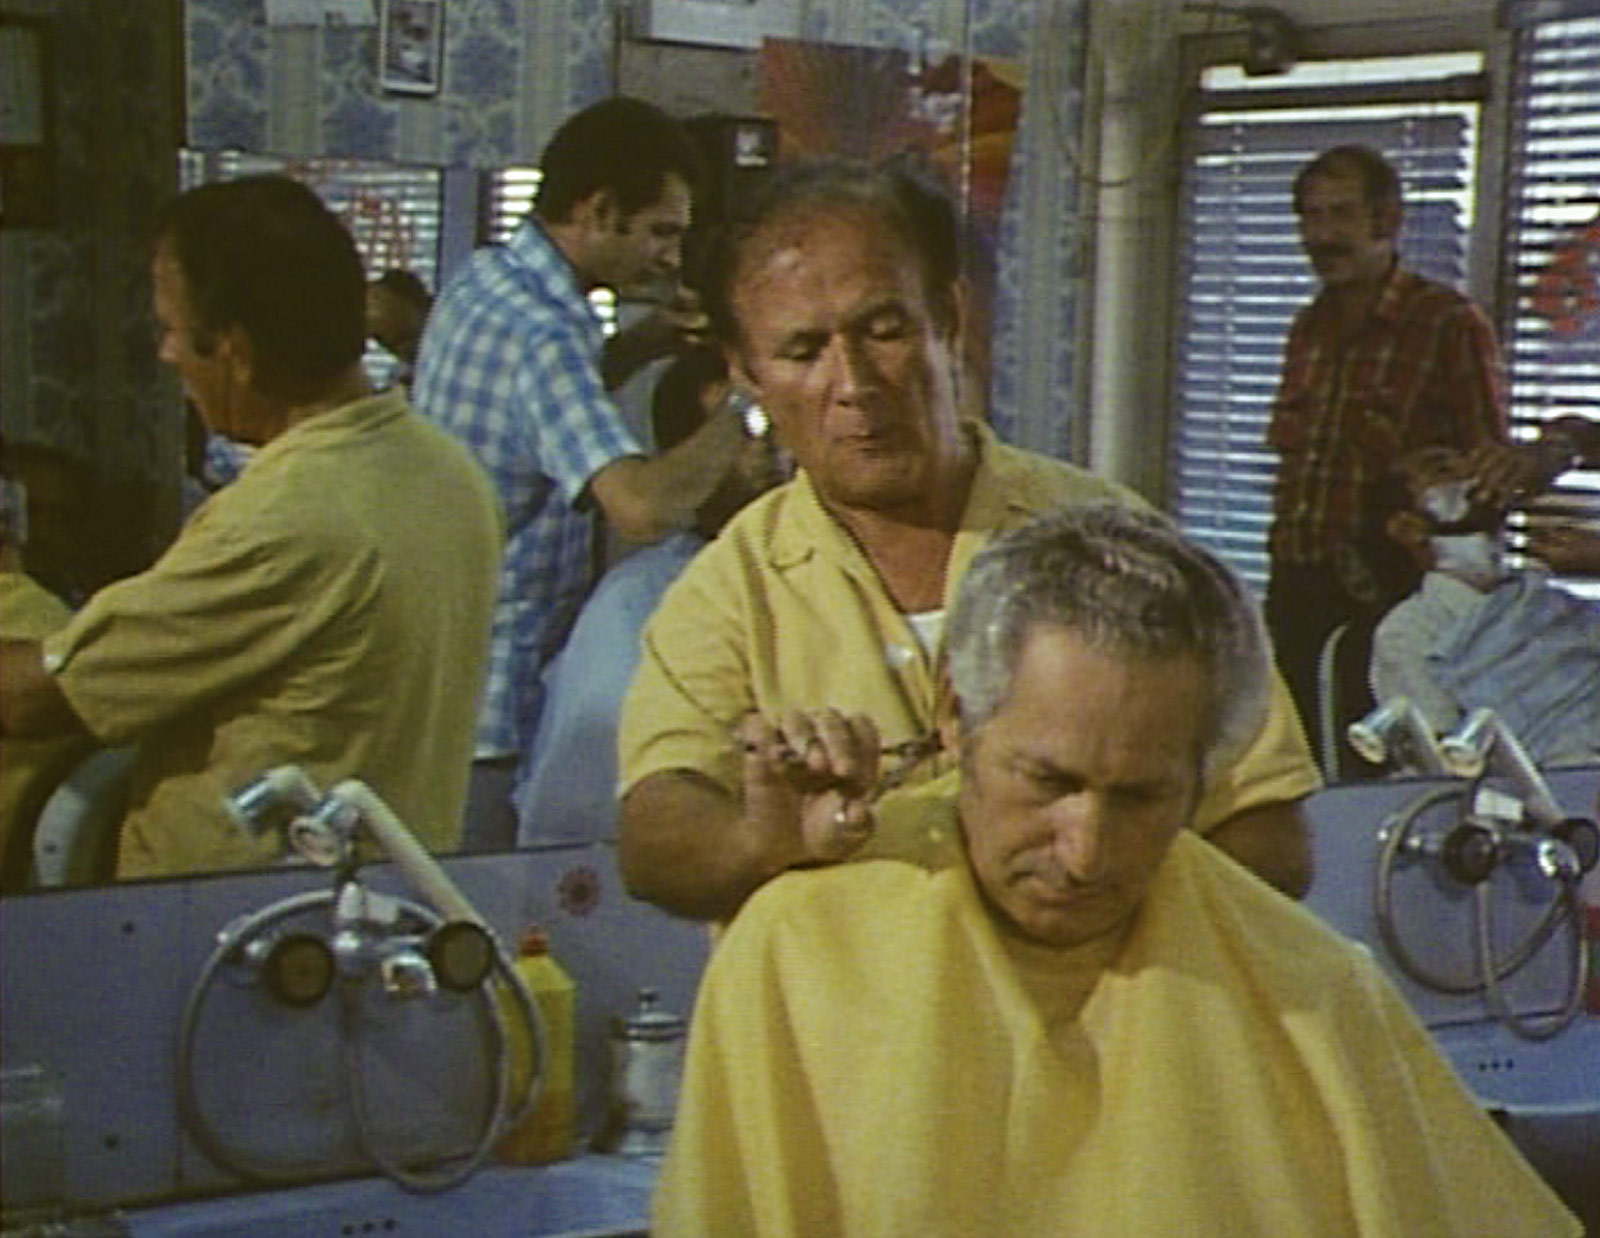 Still from the nineteen eighty five film “Shoah,” by Claude Lanzmann, depicting a scene in a barber shop from various angles.